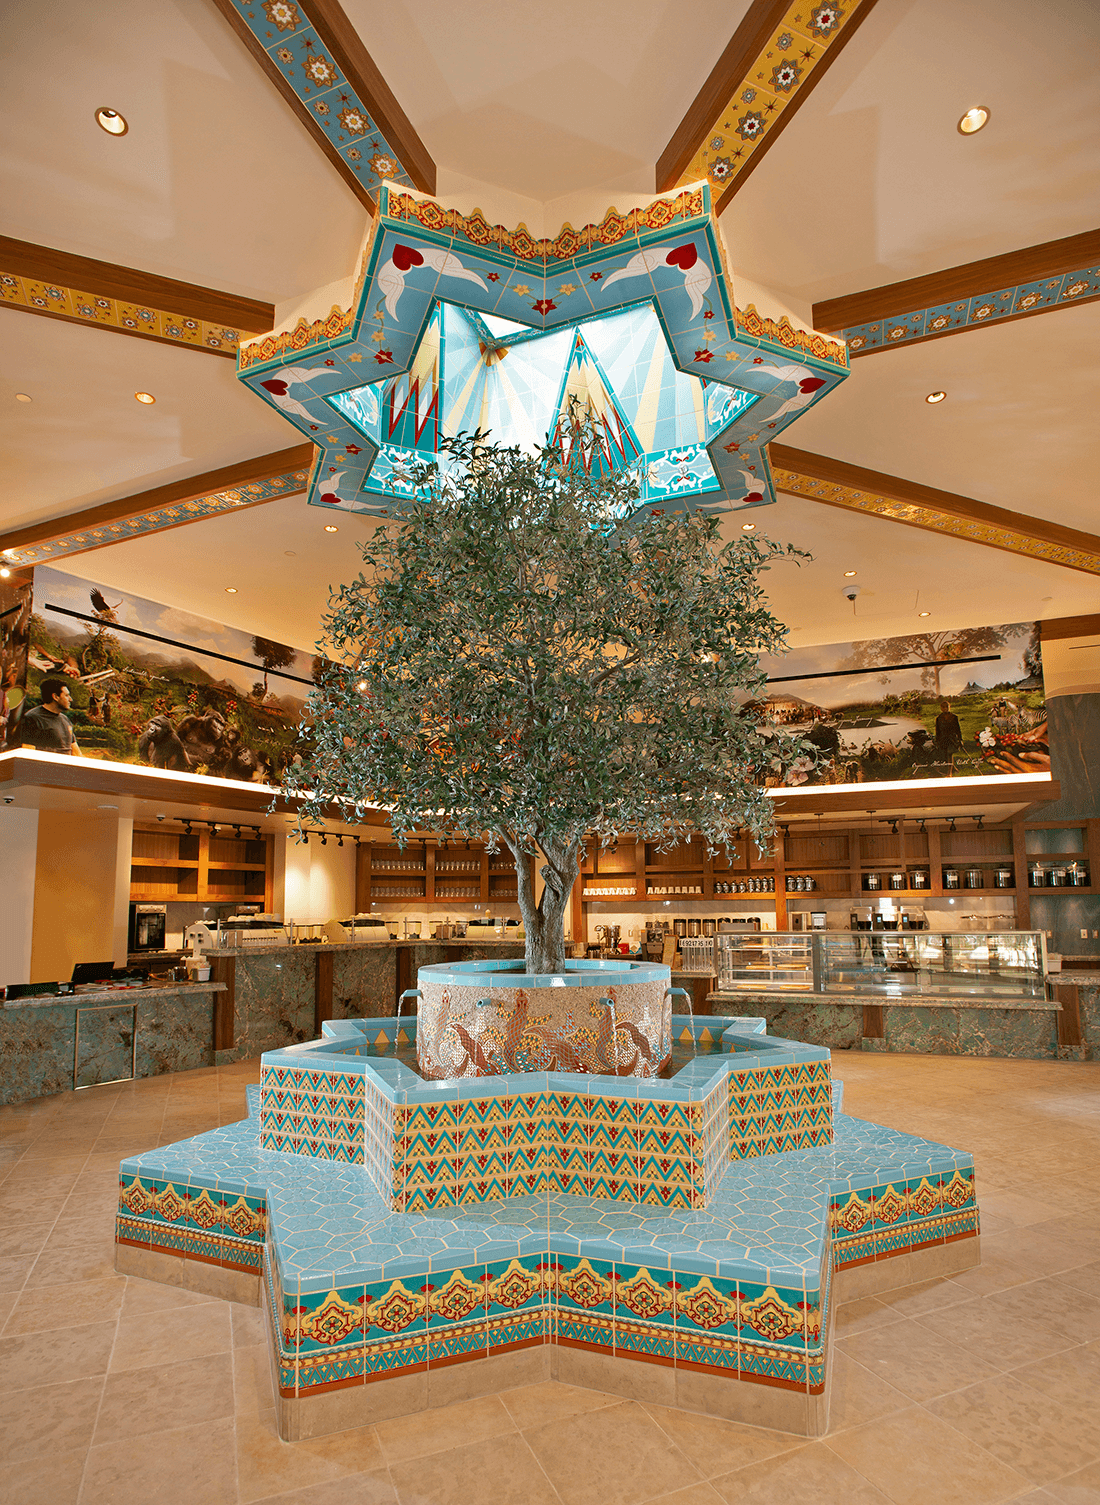 Fabricated Mediterranean Olive Tree with Malibu tile mosaic fountain base at Las Vegas Cafe